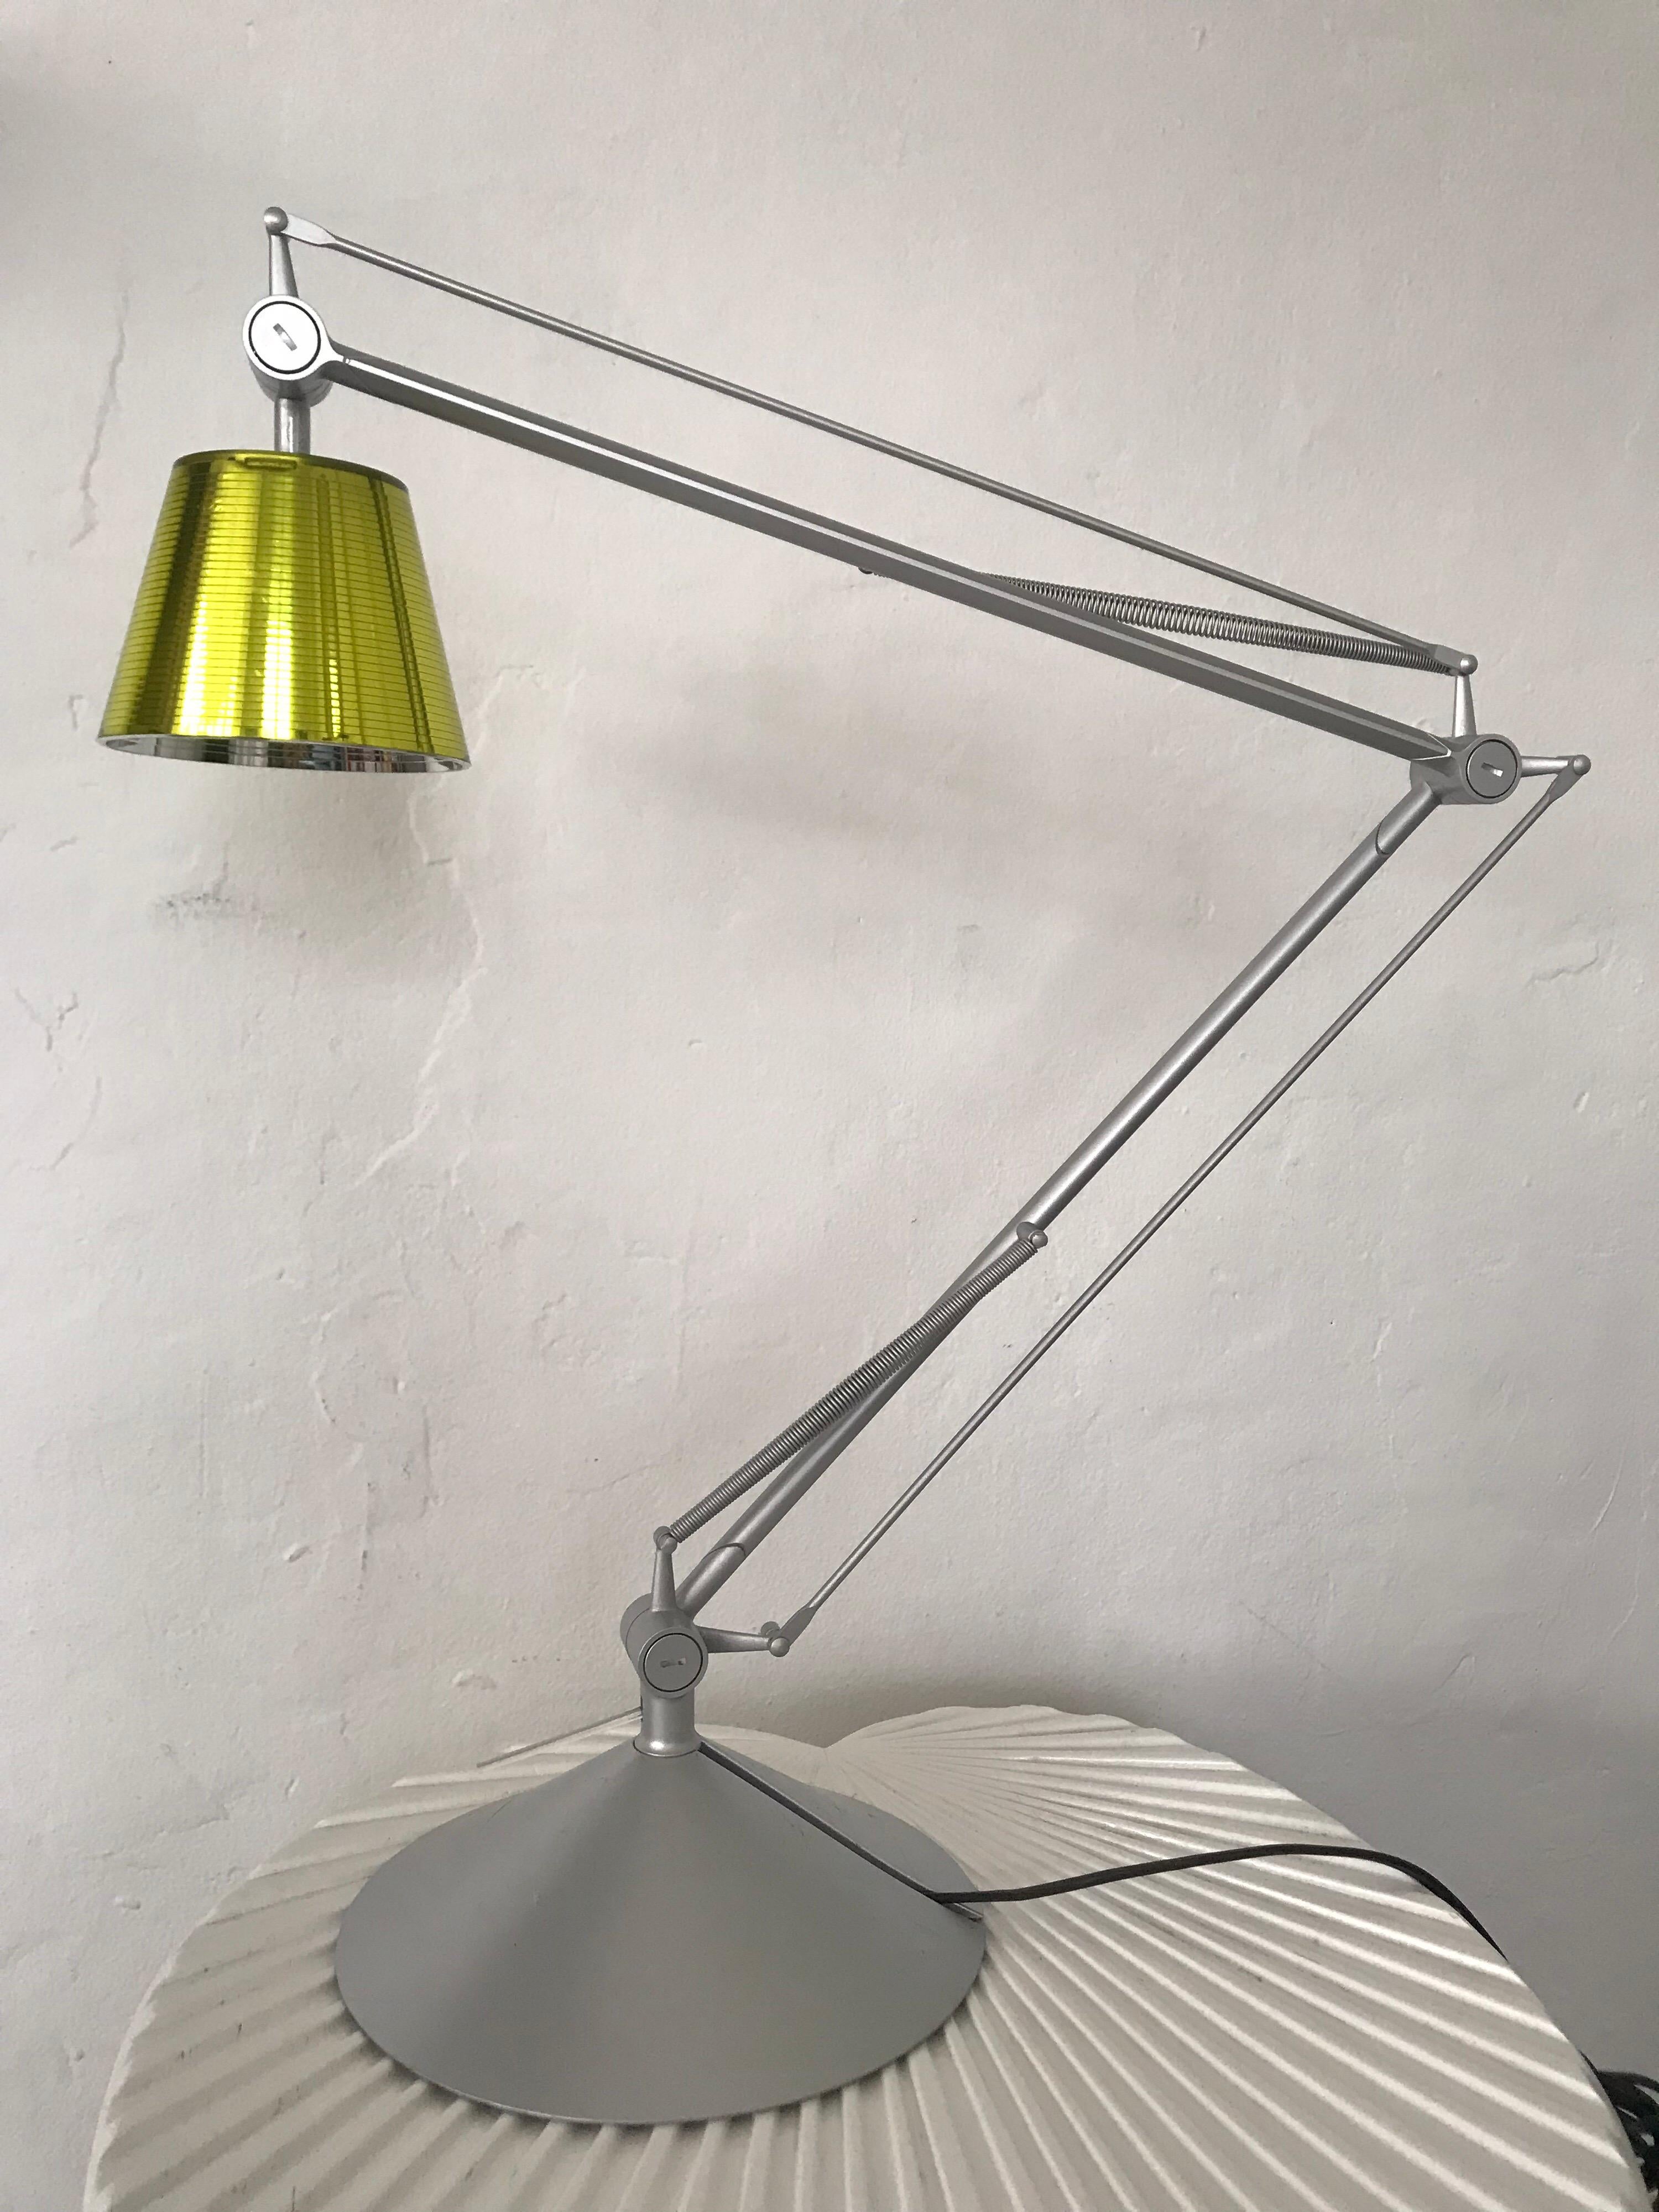 No longer produced yellow Archimoon K adjustable desk, task, or table lamp rendered in silver anodized aluminum, designed by Philippe Starck for Flos.

Lamp is currently wired with 2 prong Euro plug, can be converted to US standard if desired.